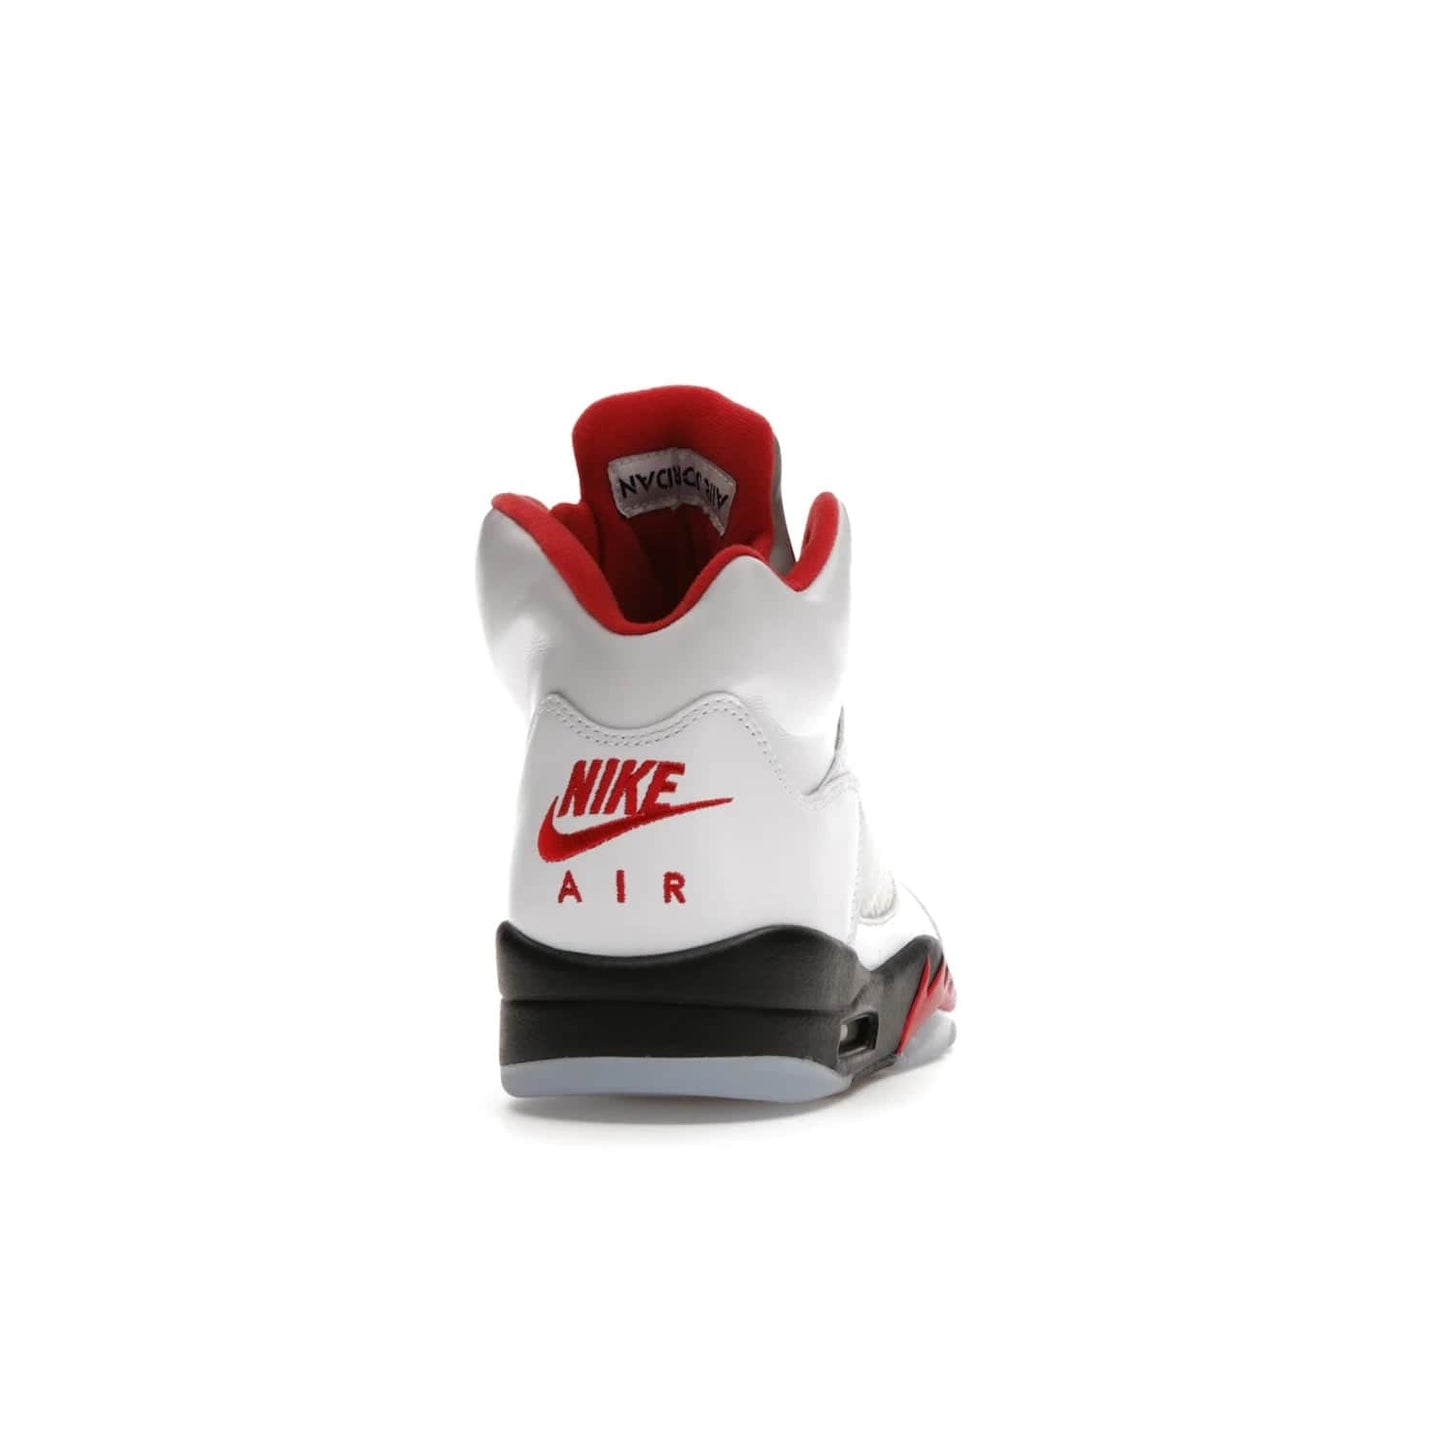 Jordan 5 Retro Fire Red Silver Tongue (2020) - Image 29 - Only at www.BallersClubKickz.com - Experience classic styling with the Jordan 5 Retro Fire Red Silver Tongue (2020). Features a white leather upper, 3M reflective tongue, midsole colorblocking, and an icy translucent outsole. Now available, upgrade your shoe collection today.